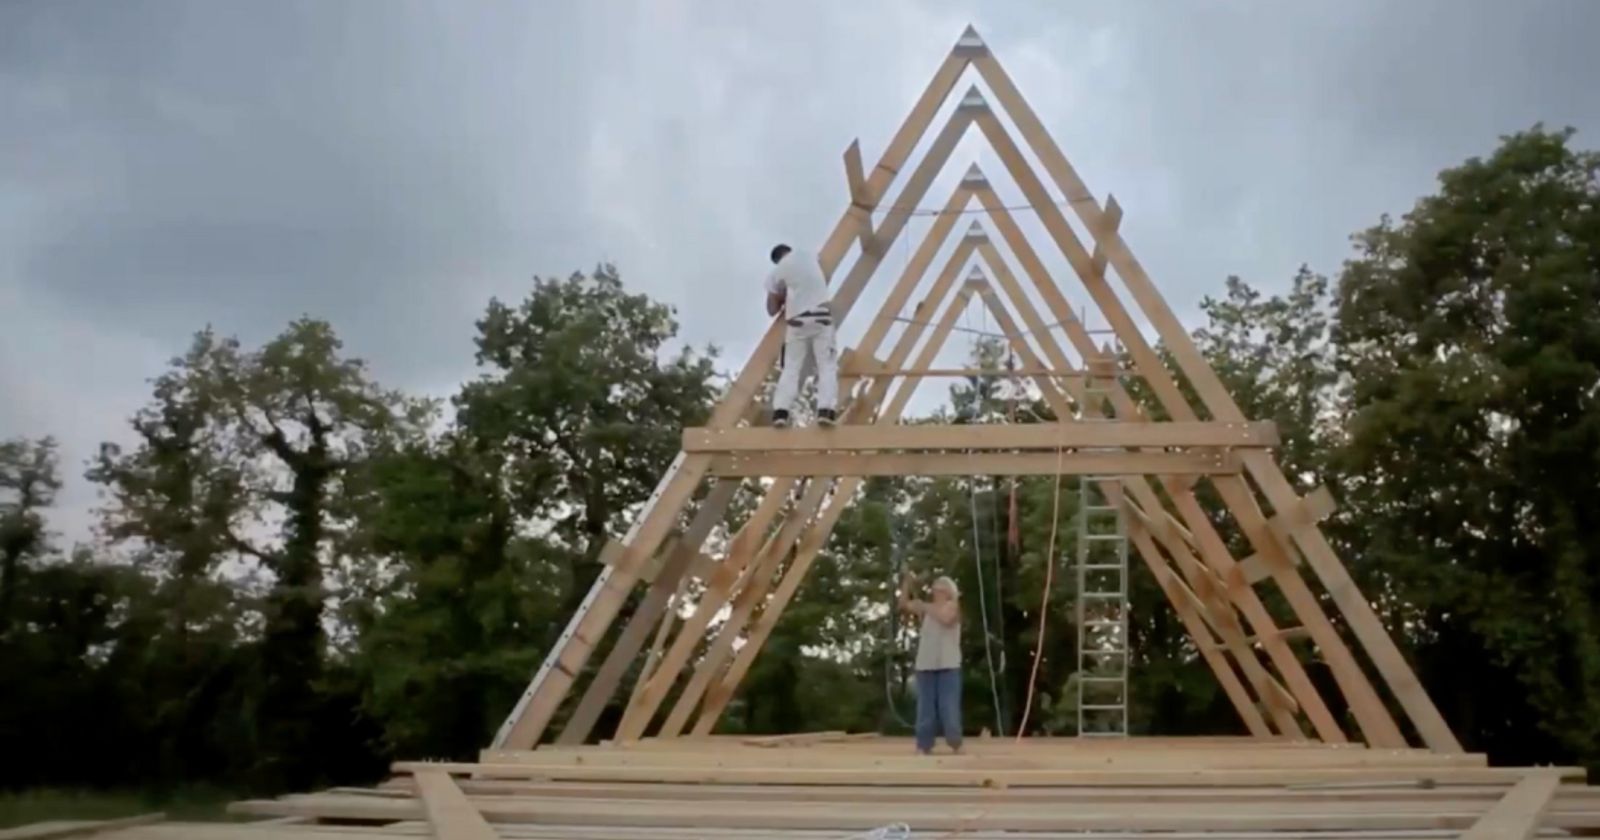 With her A-frame house of less than 50,000 euros, Elizabeth Faure inspires hundreds of French people